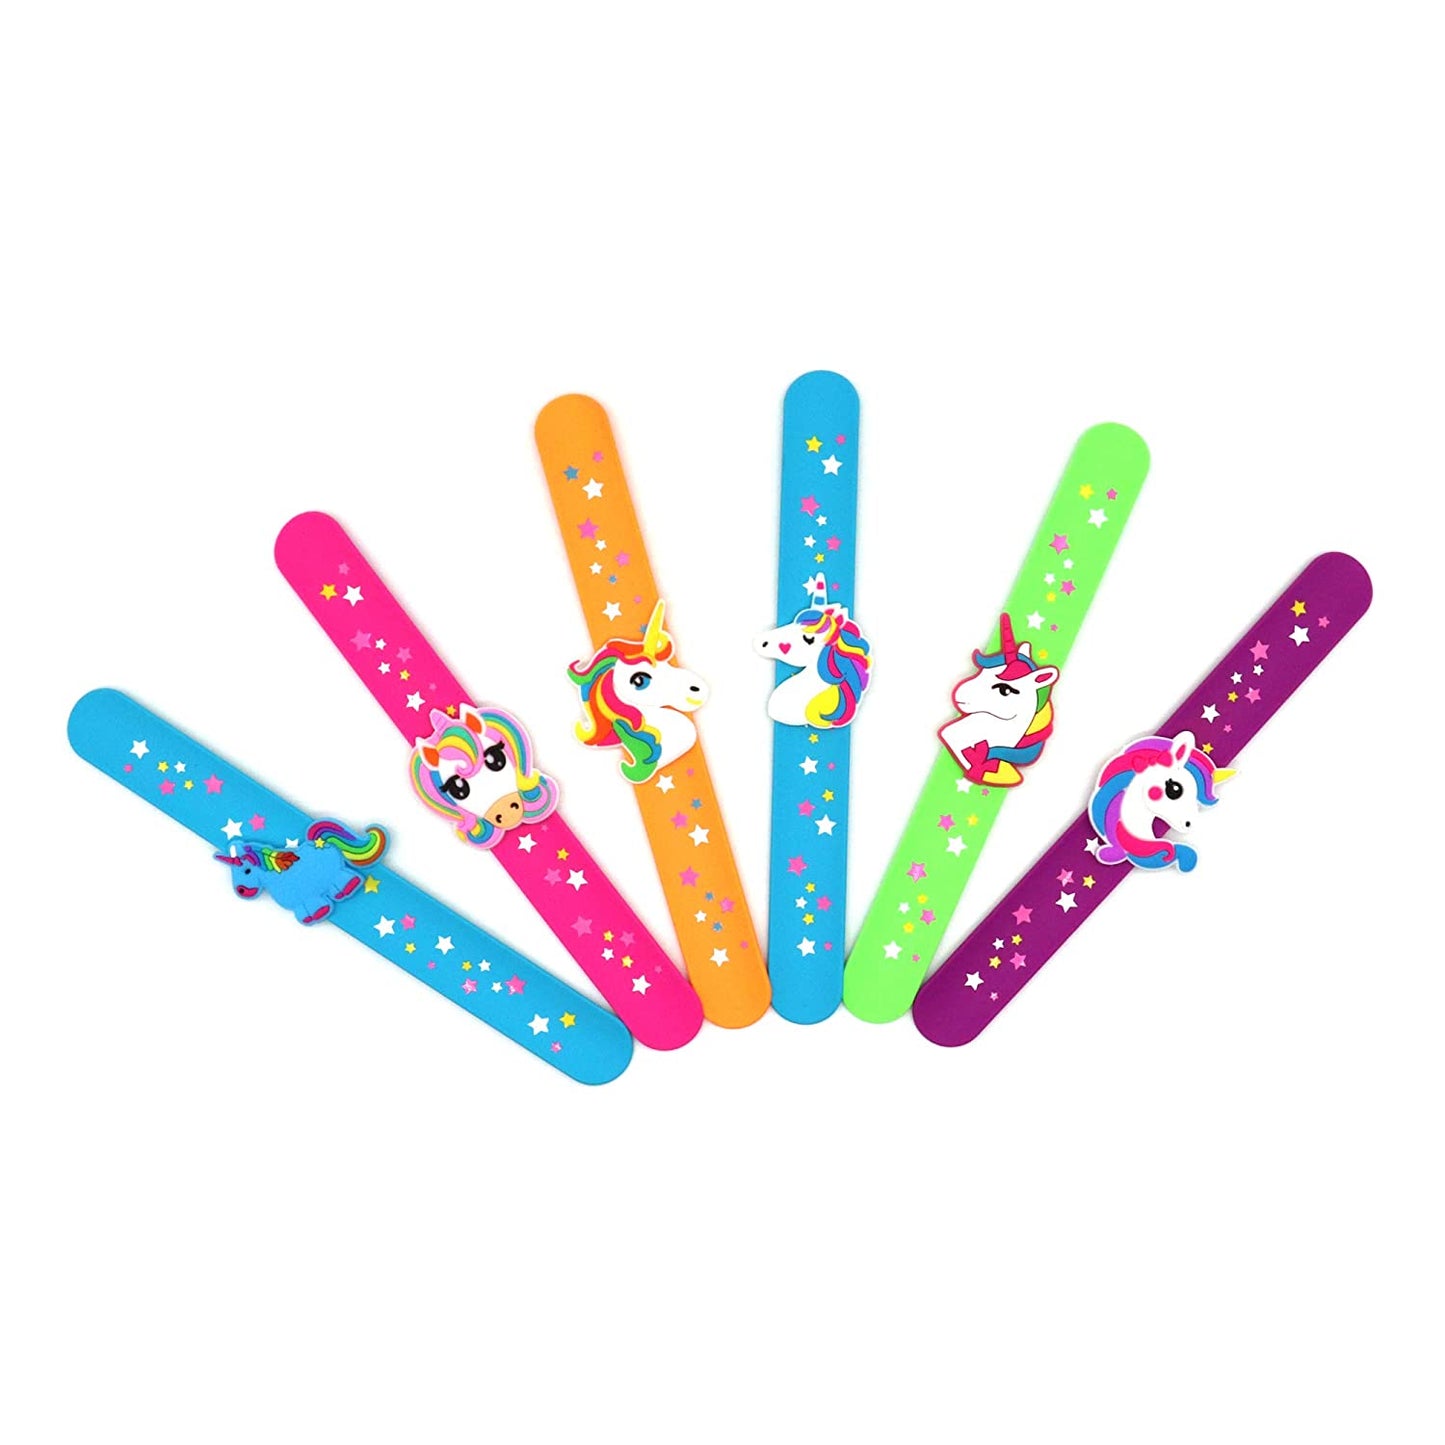 6 PCs Silicone unicorn Slap Bands/ Wrist Bands- Silicone Unicorn Wristband Birthday Party Favors, Boys Girls Party Favors Gifts Carnival Prizes Set